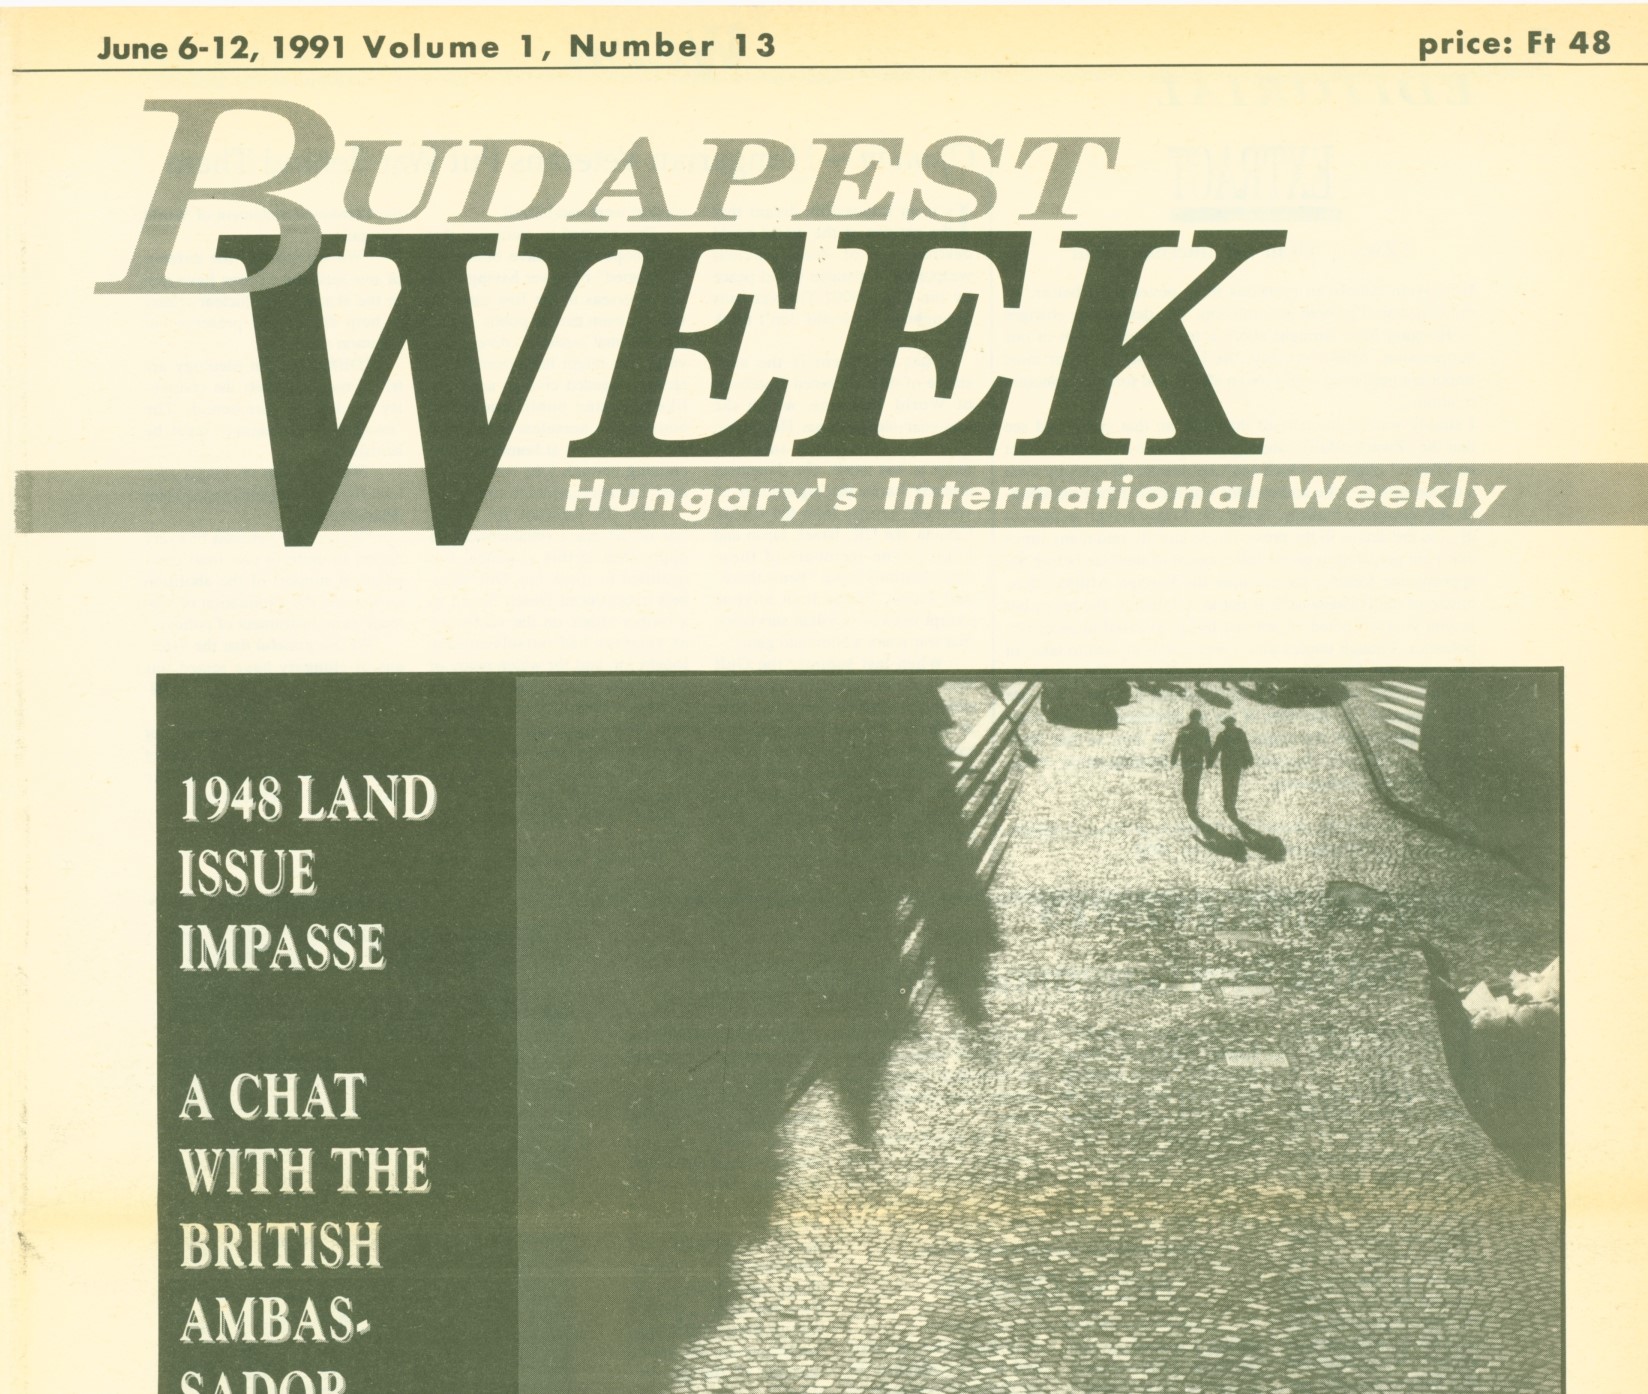 The Budapest Week Then and Now - Public Talk by the Former Editors